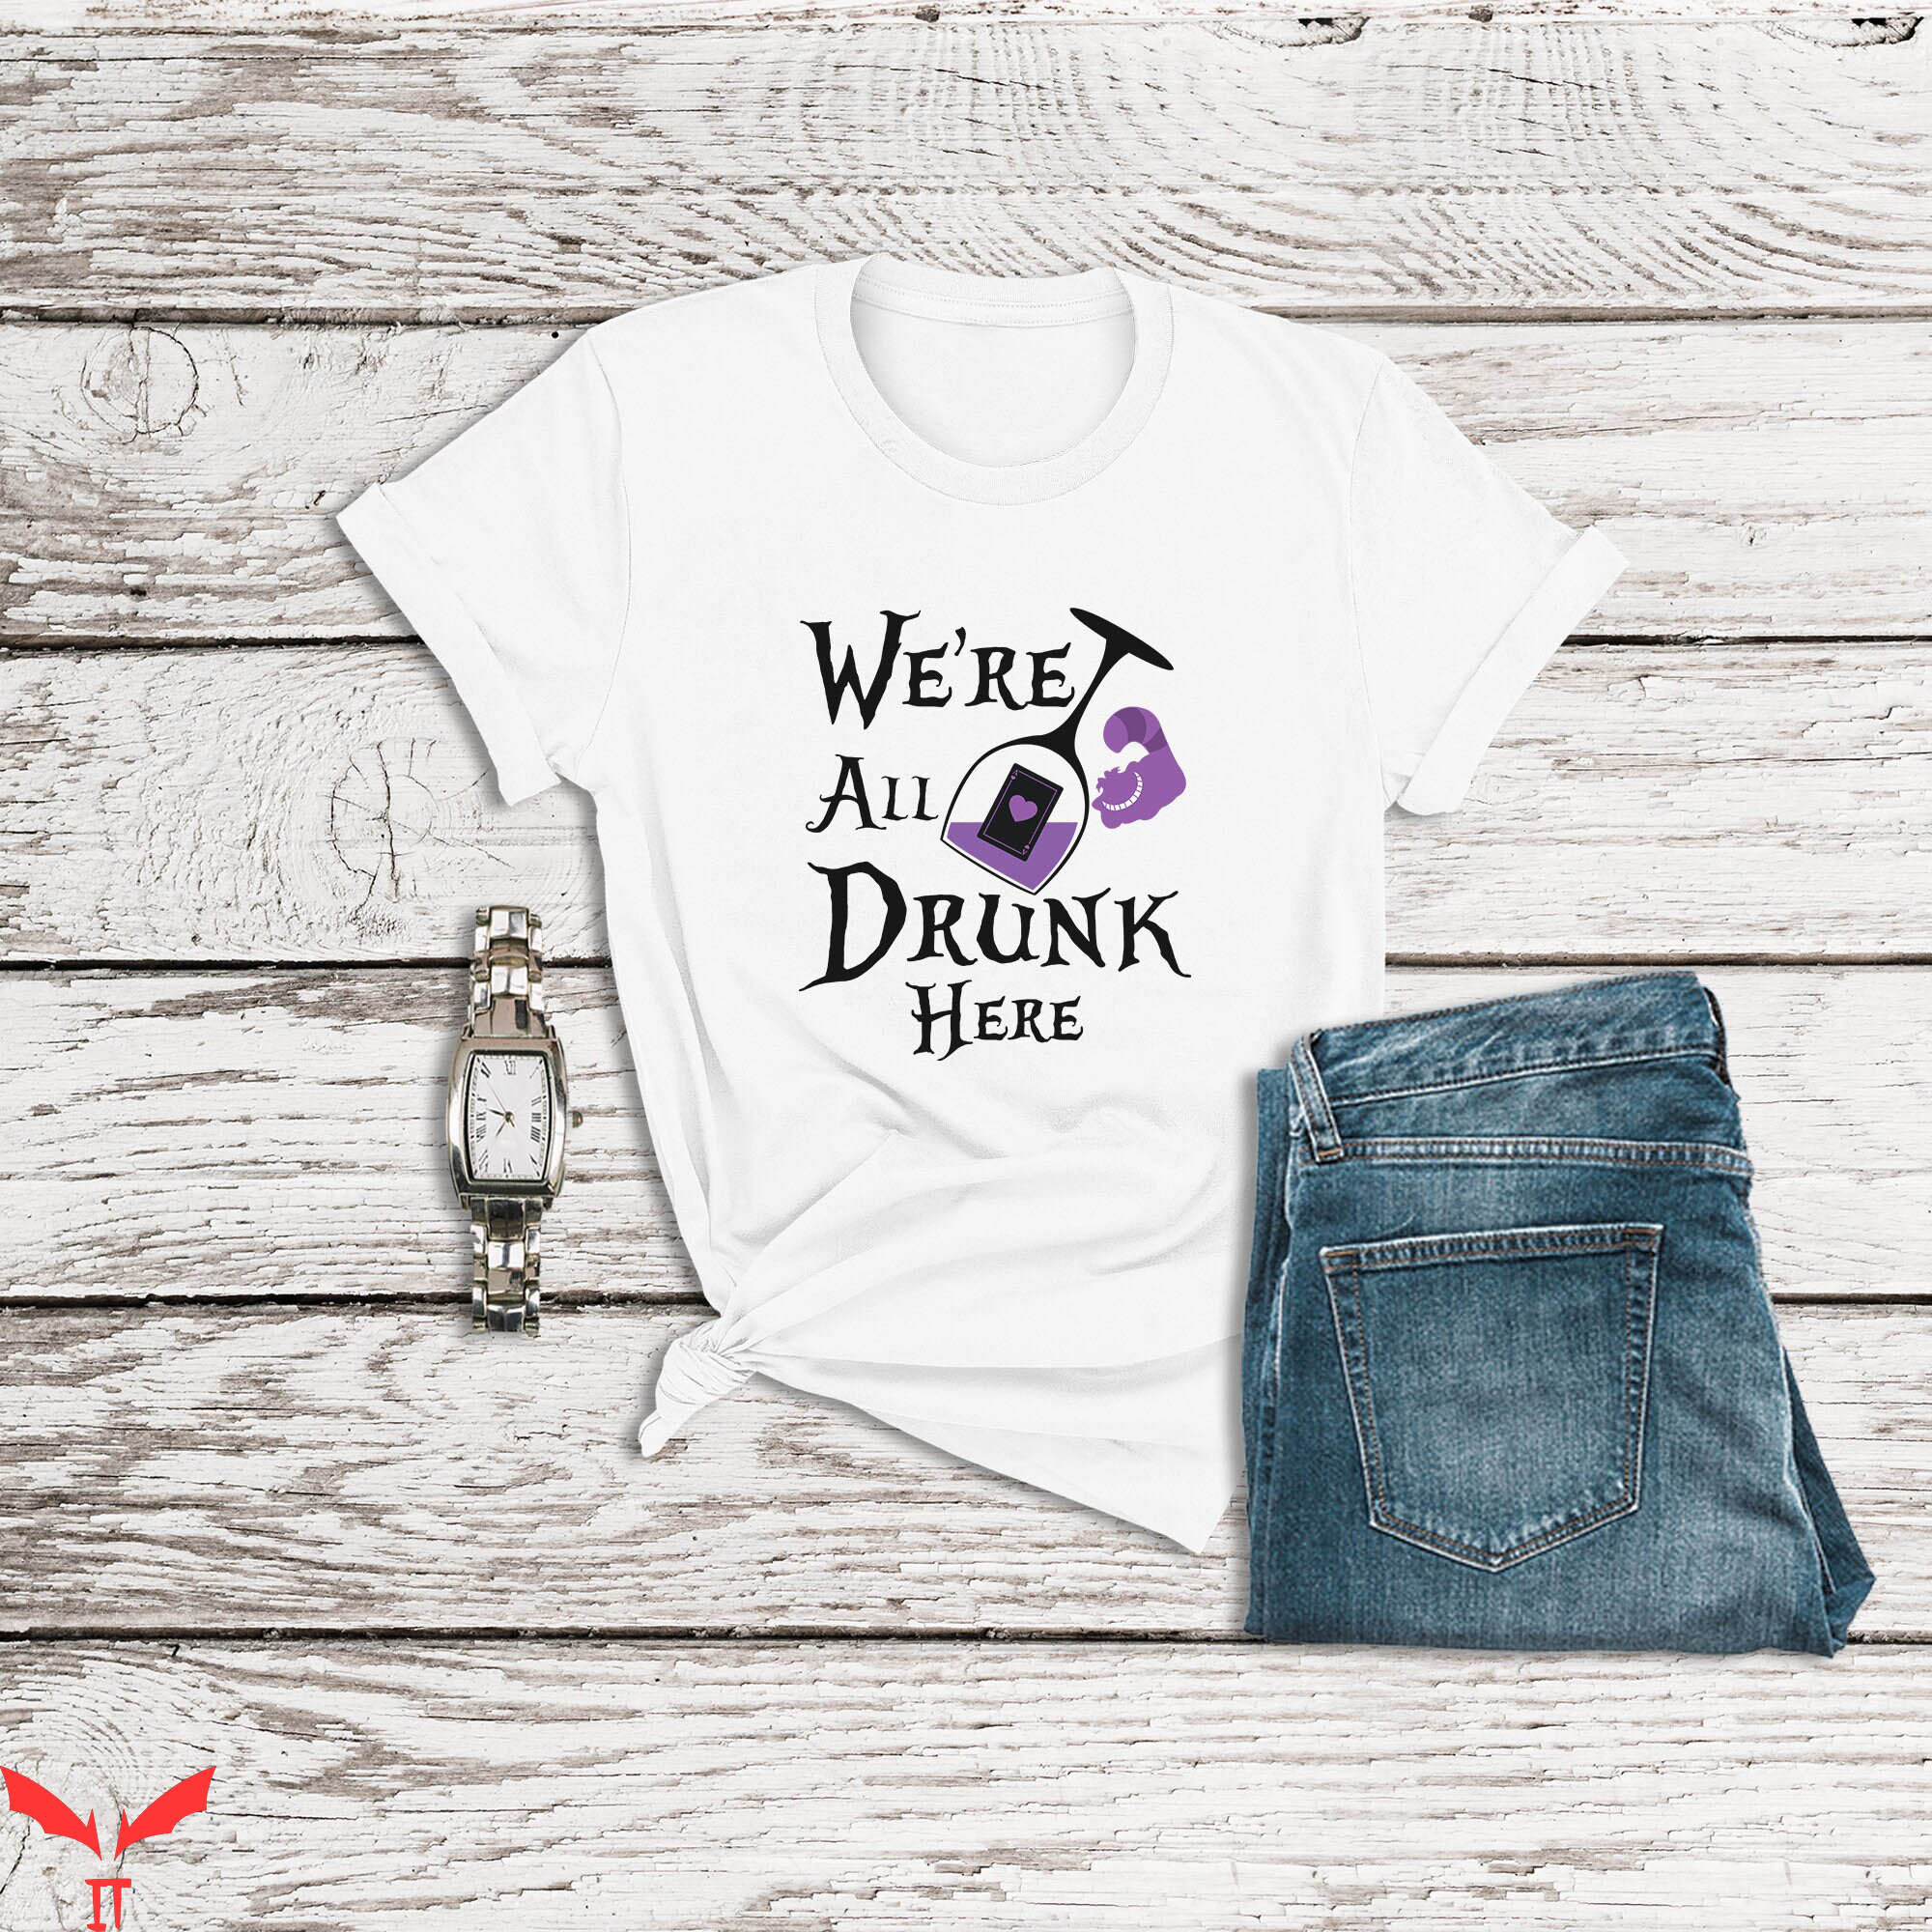 We All Float Down Here T-Shirt We're All Drunk Here IT Movie